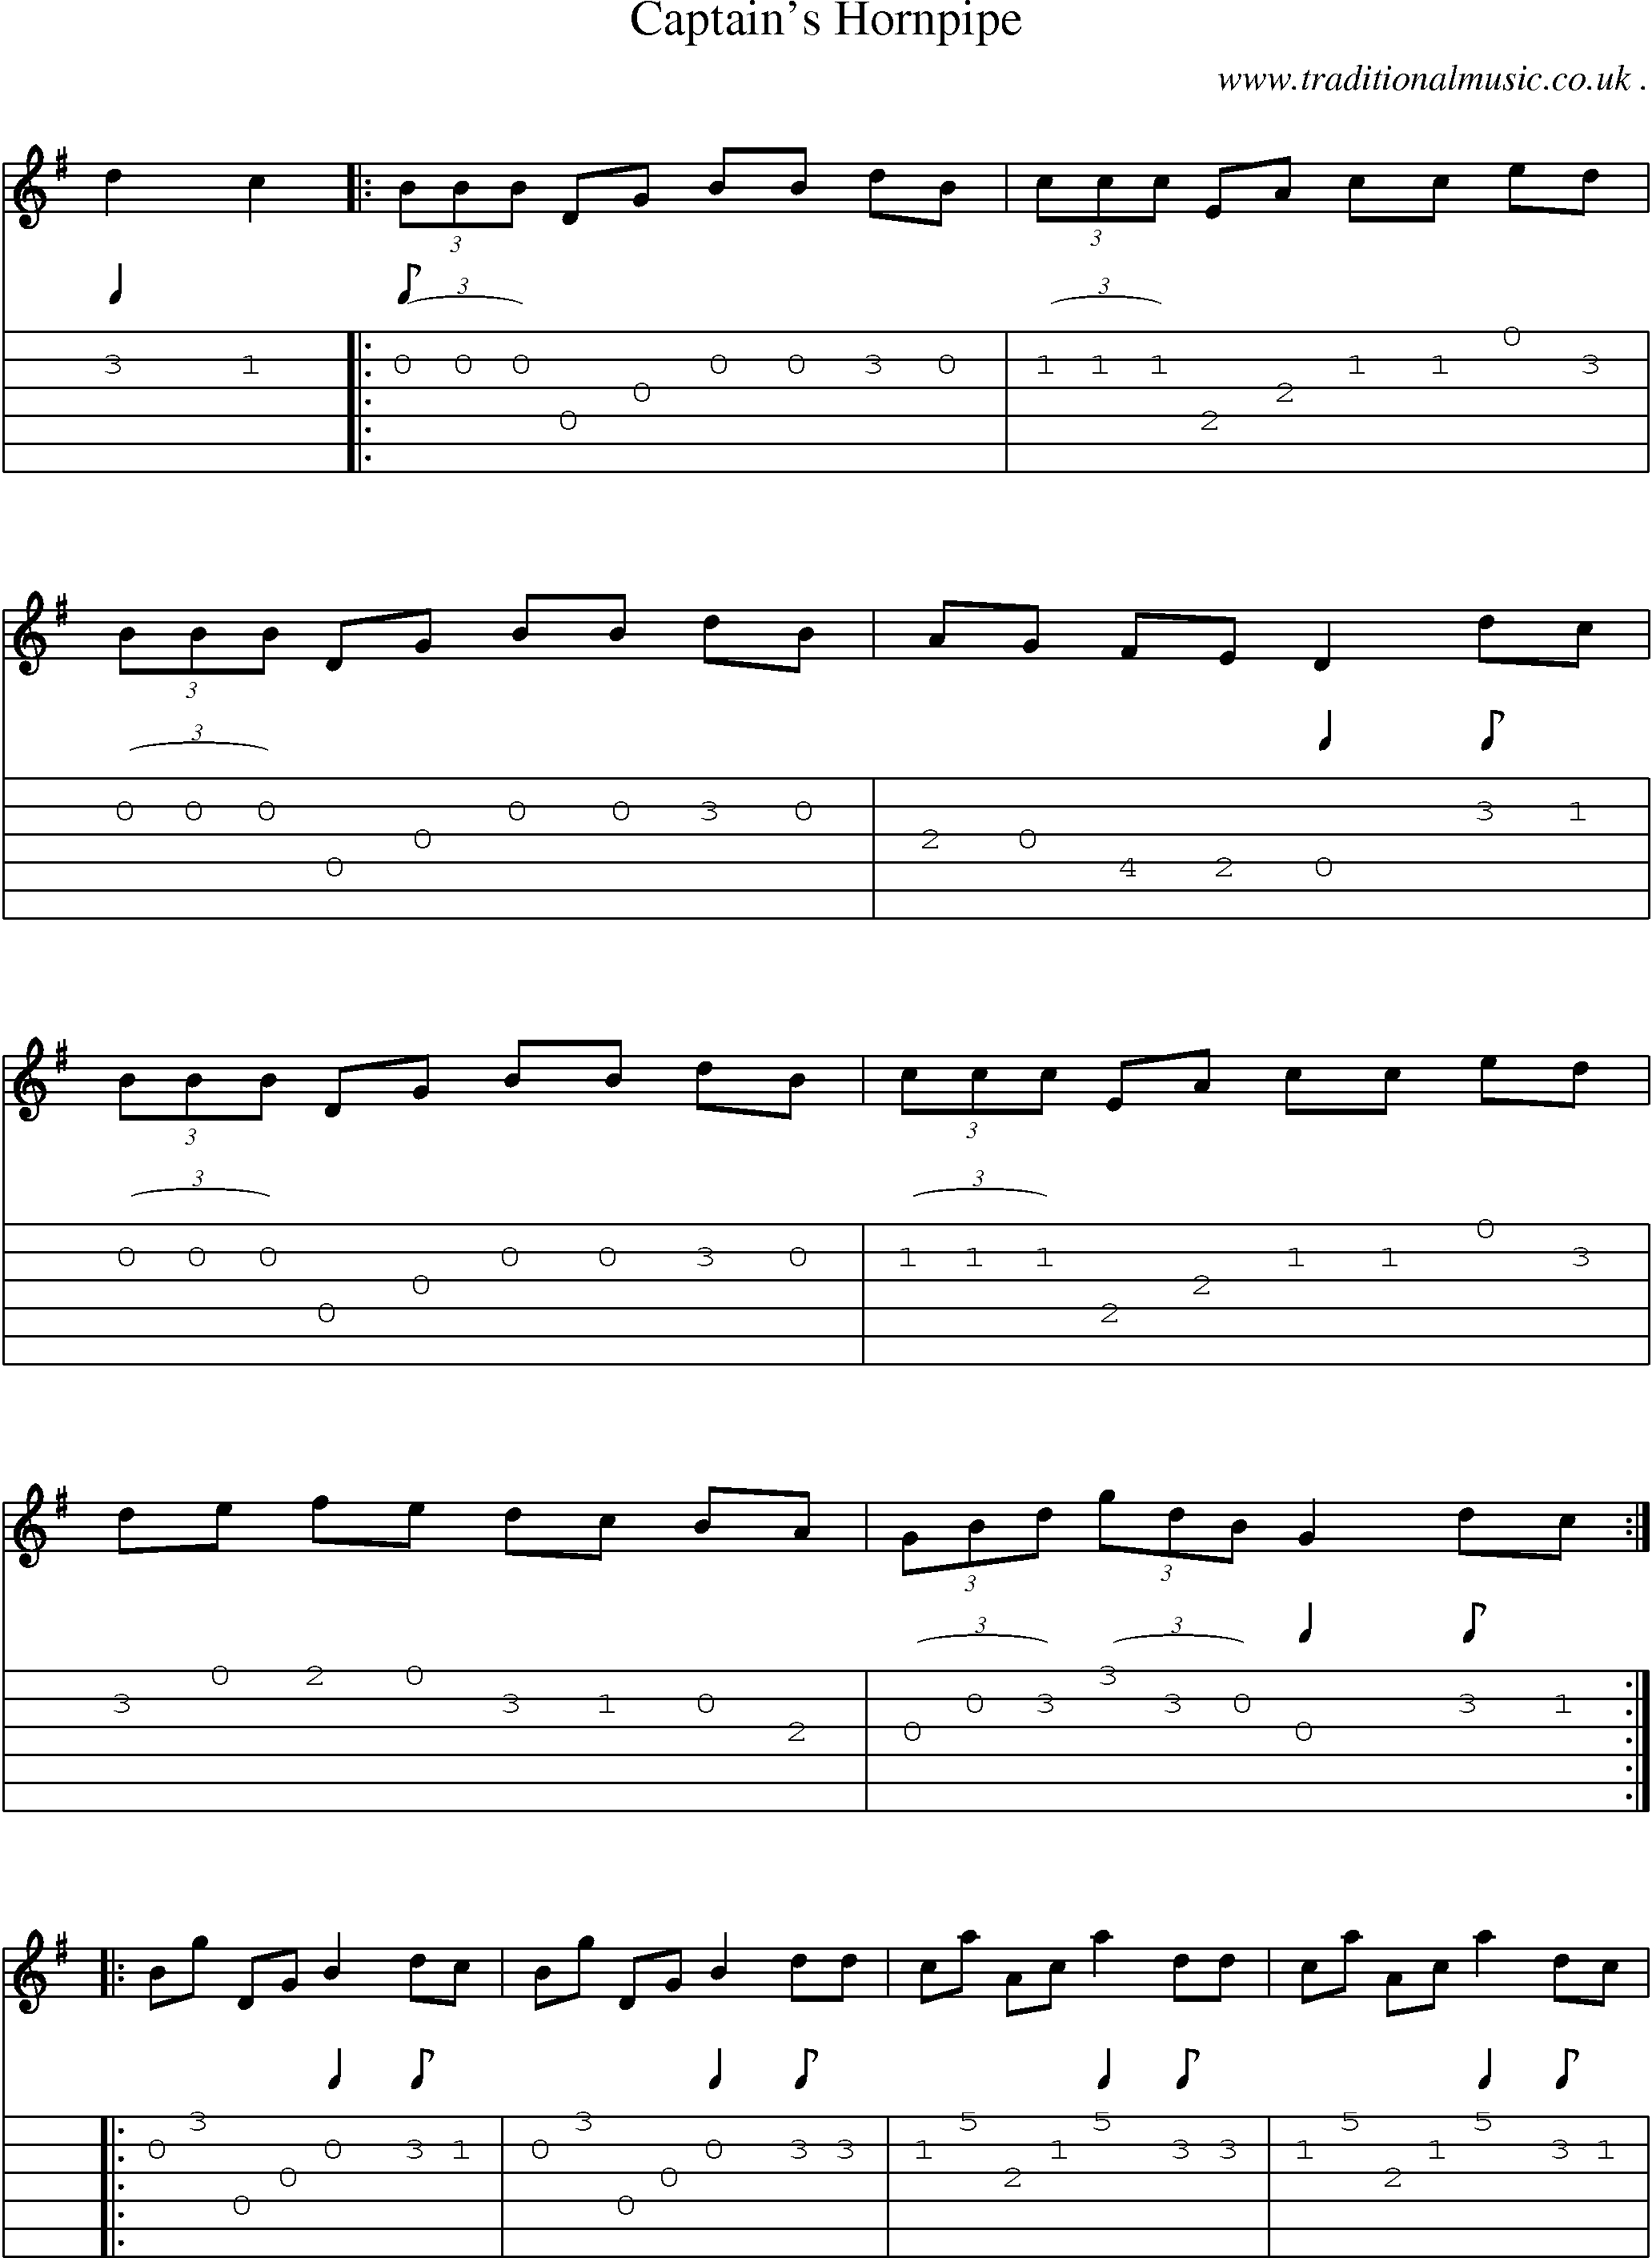 Sheet-Music and Guitar Tabs for Captains Hornpipe